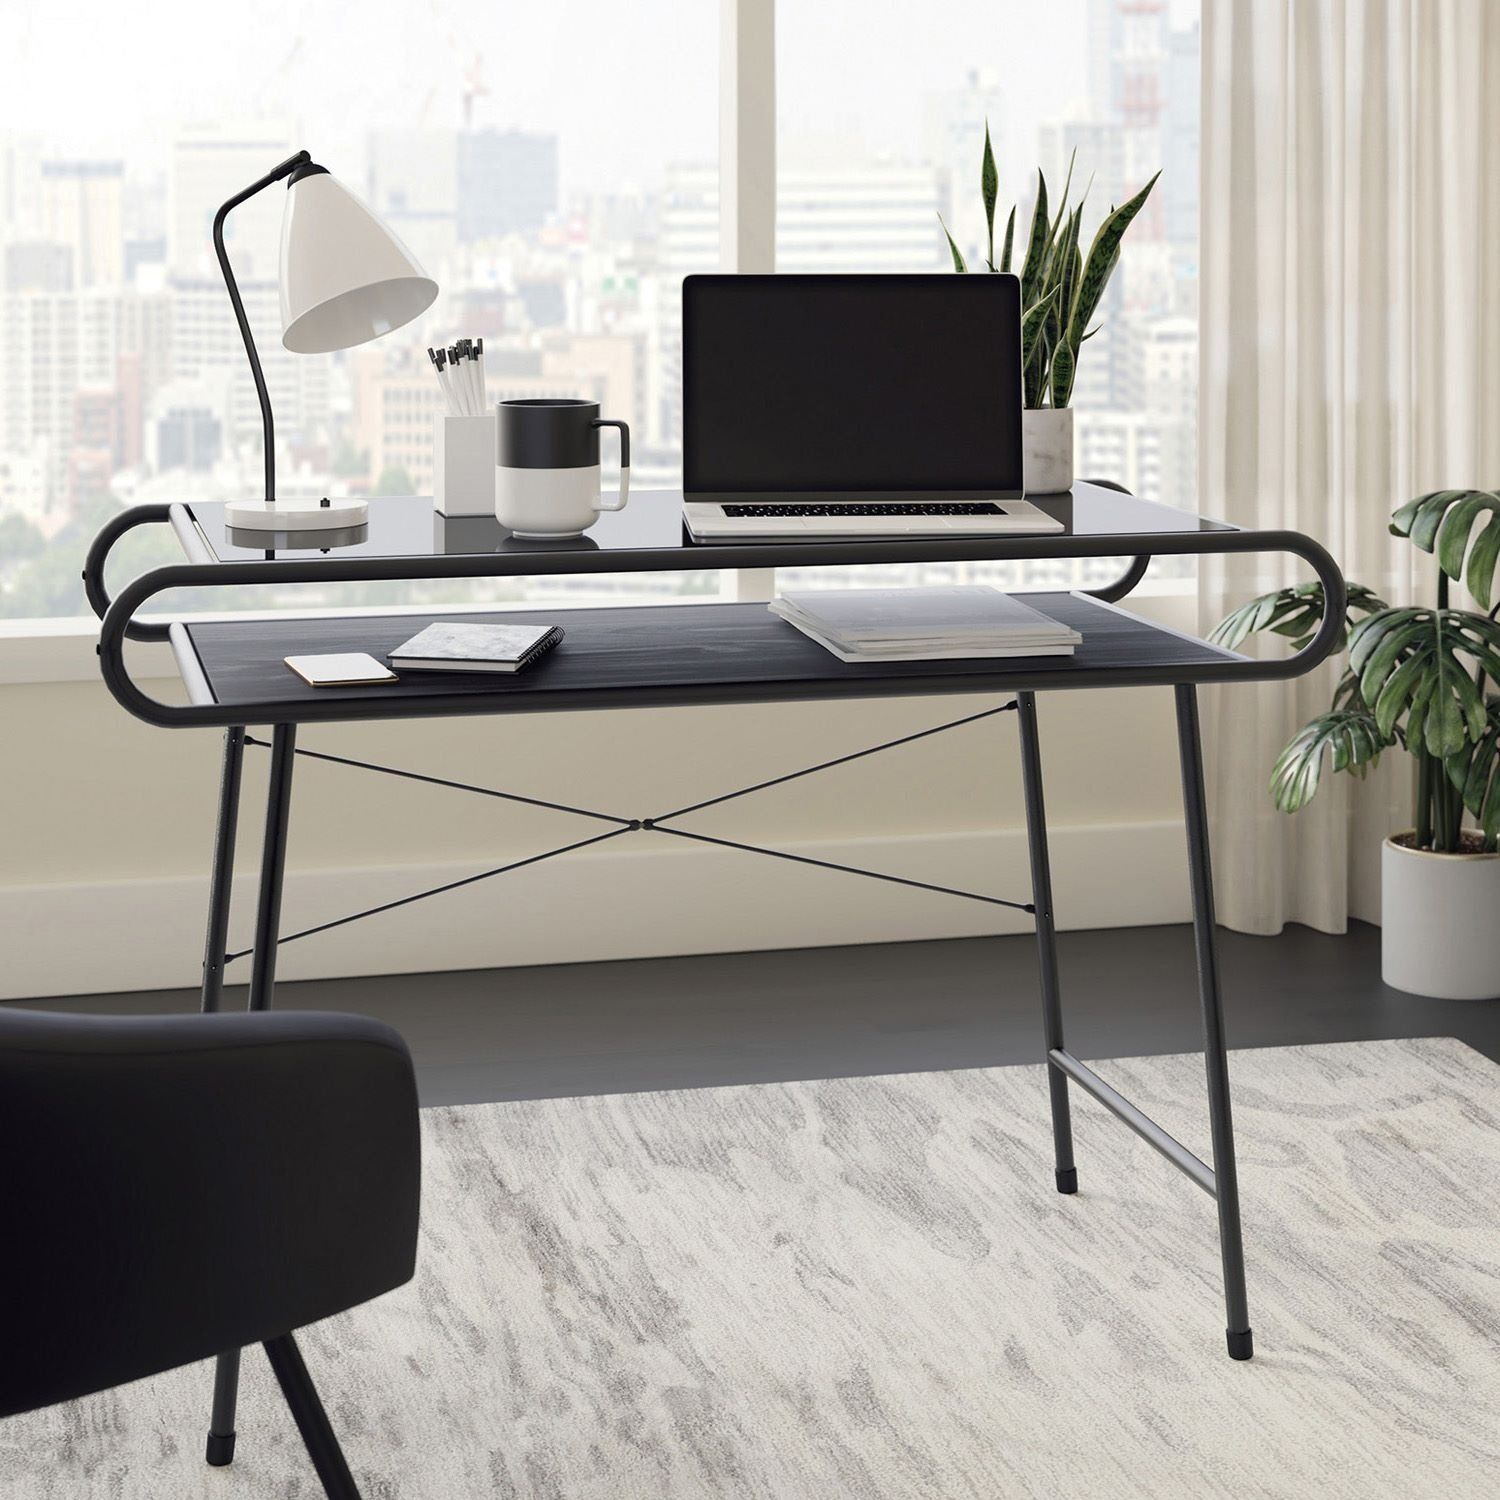 Realm Home Office Glass Laptop Desk | Free Uk Delivery Inside Glass And Chrome Modern Computer Office Desks (View 5 of 15)